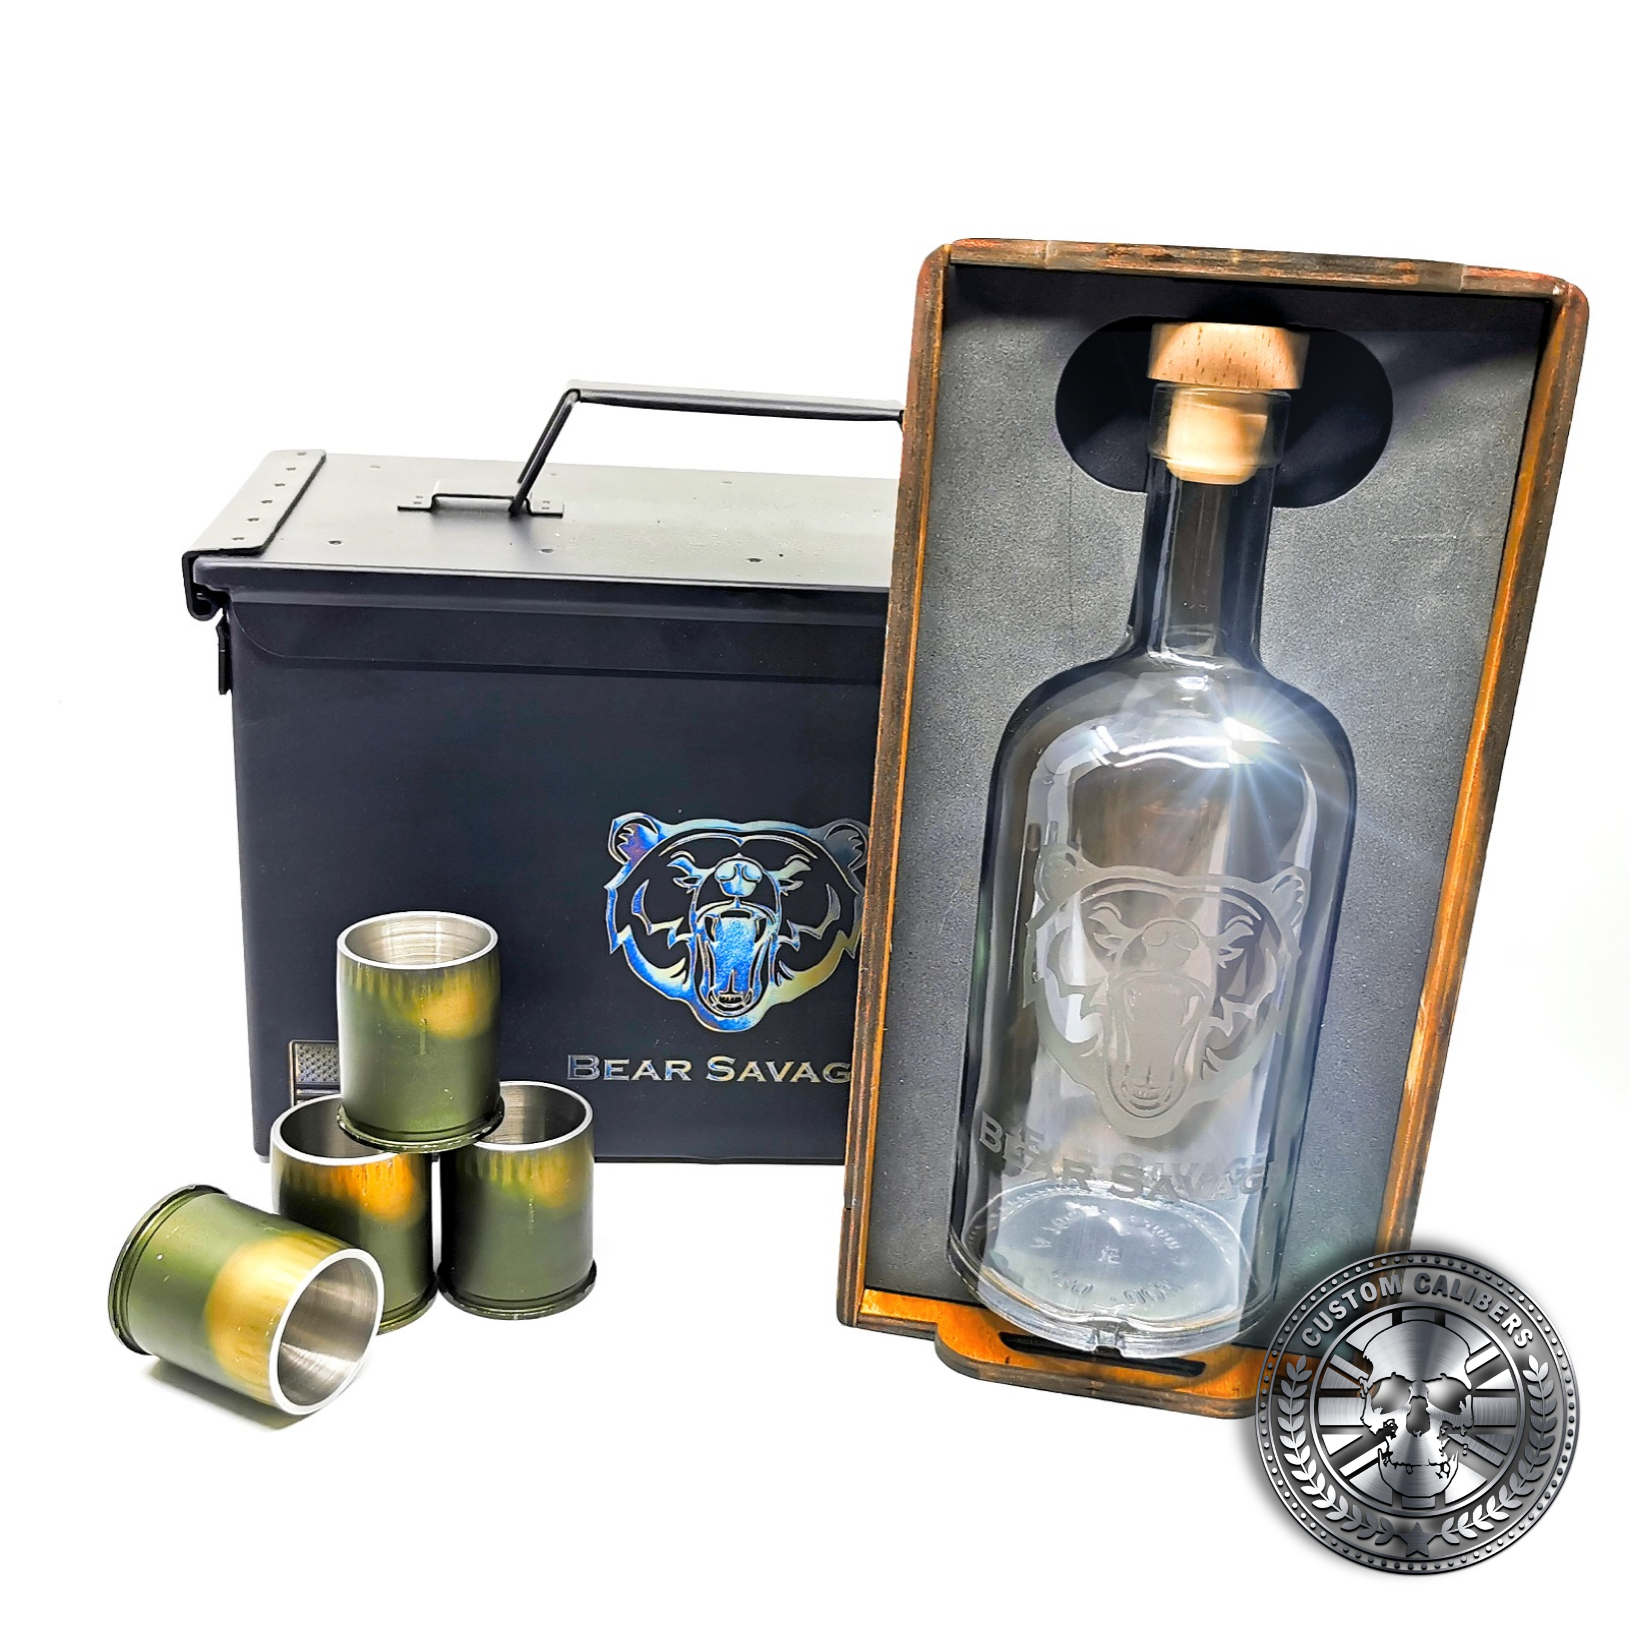 the MK19 GMG grenade gift set showing a whisky bottle and four grenade shot glasses